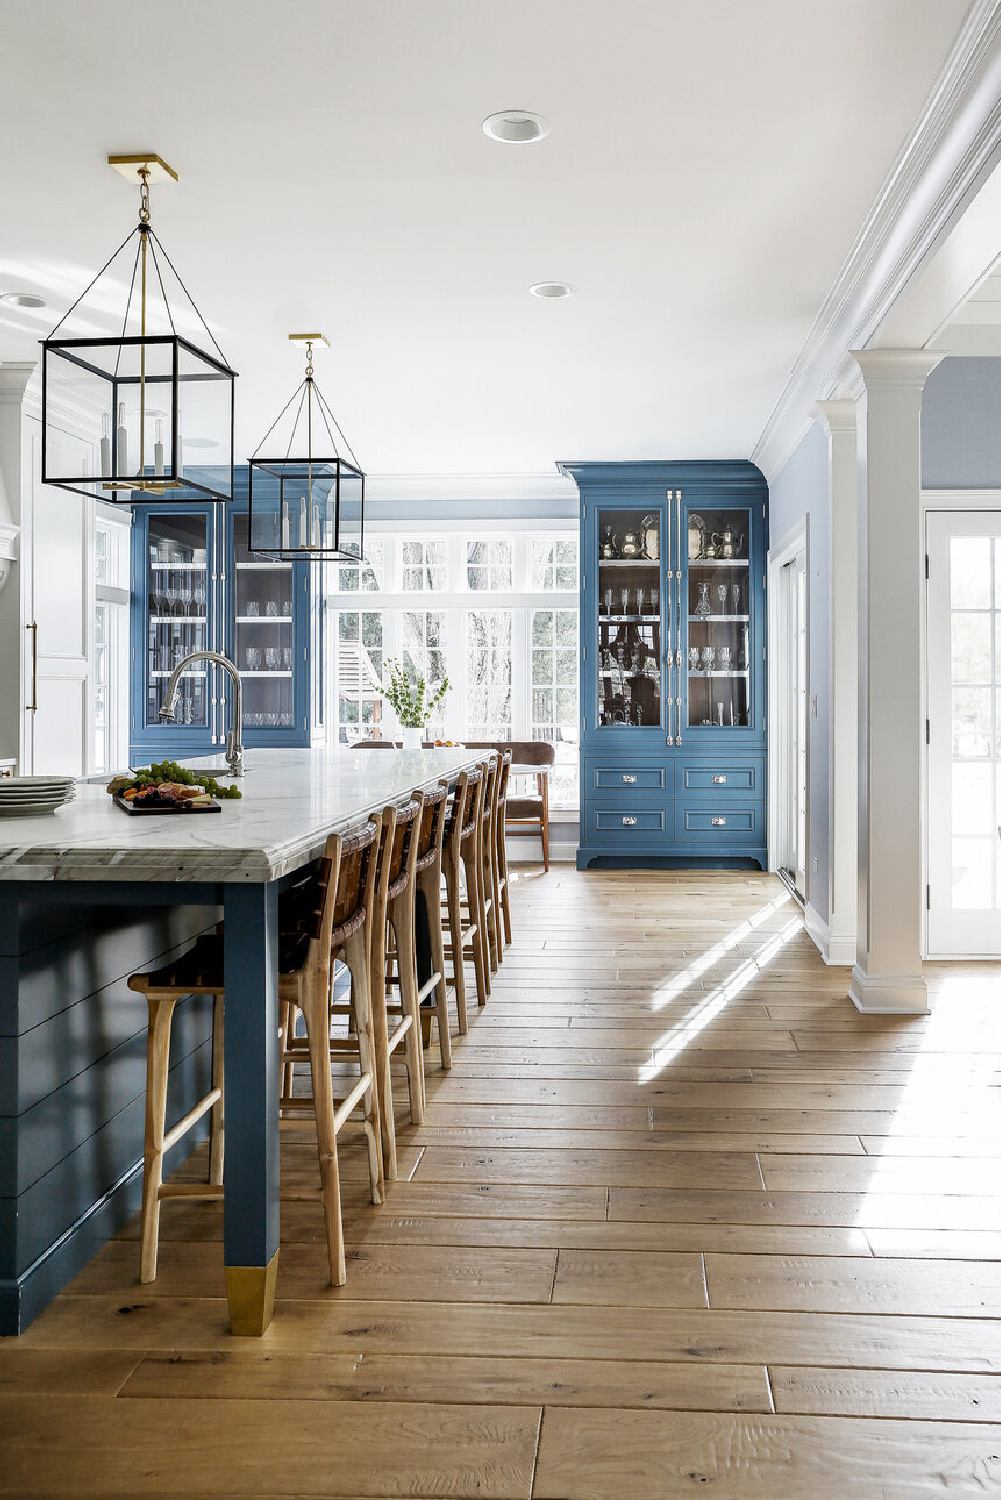 Classic blue kitchen ideas with traditional architecture, custom millwork, and sophisticated design - Edward Deegan Architects. #bluekitchens #traditionalkithens #classicbluekitchen